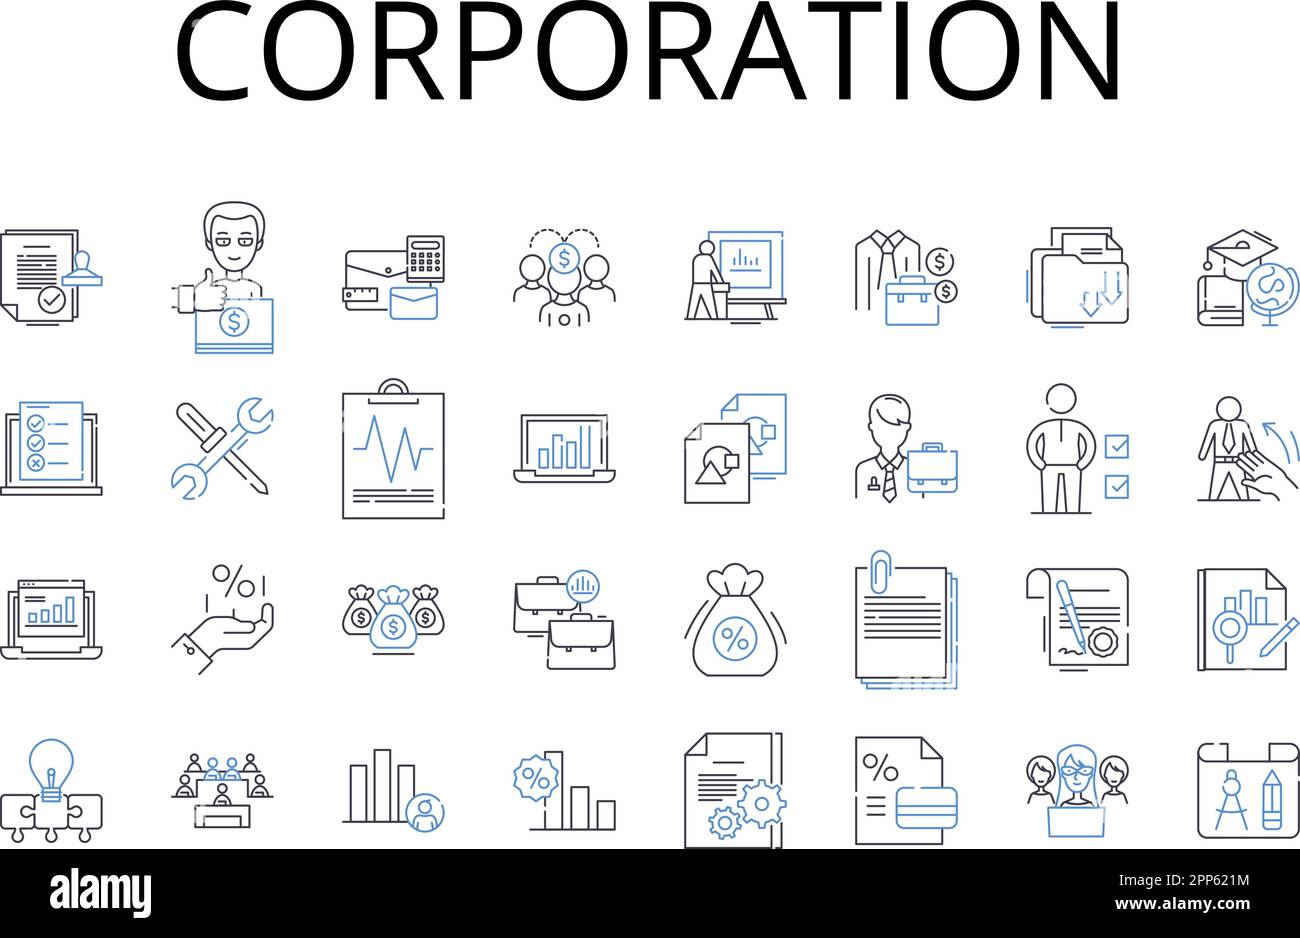 Corporation line icons collection. Business entity, Conglomerate, Company group, Commercial enterprise, Concern organization, Inc undertaking, Joint Stock Vector